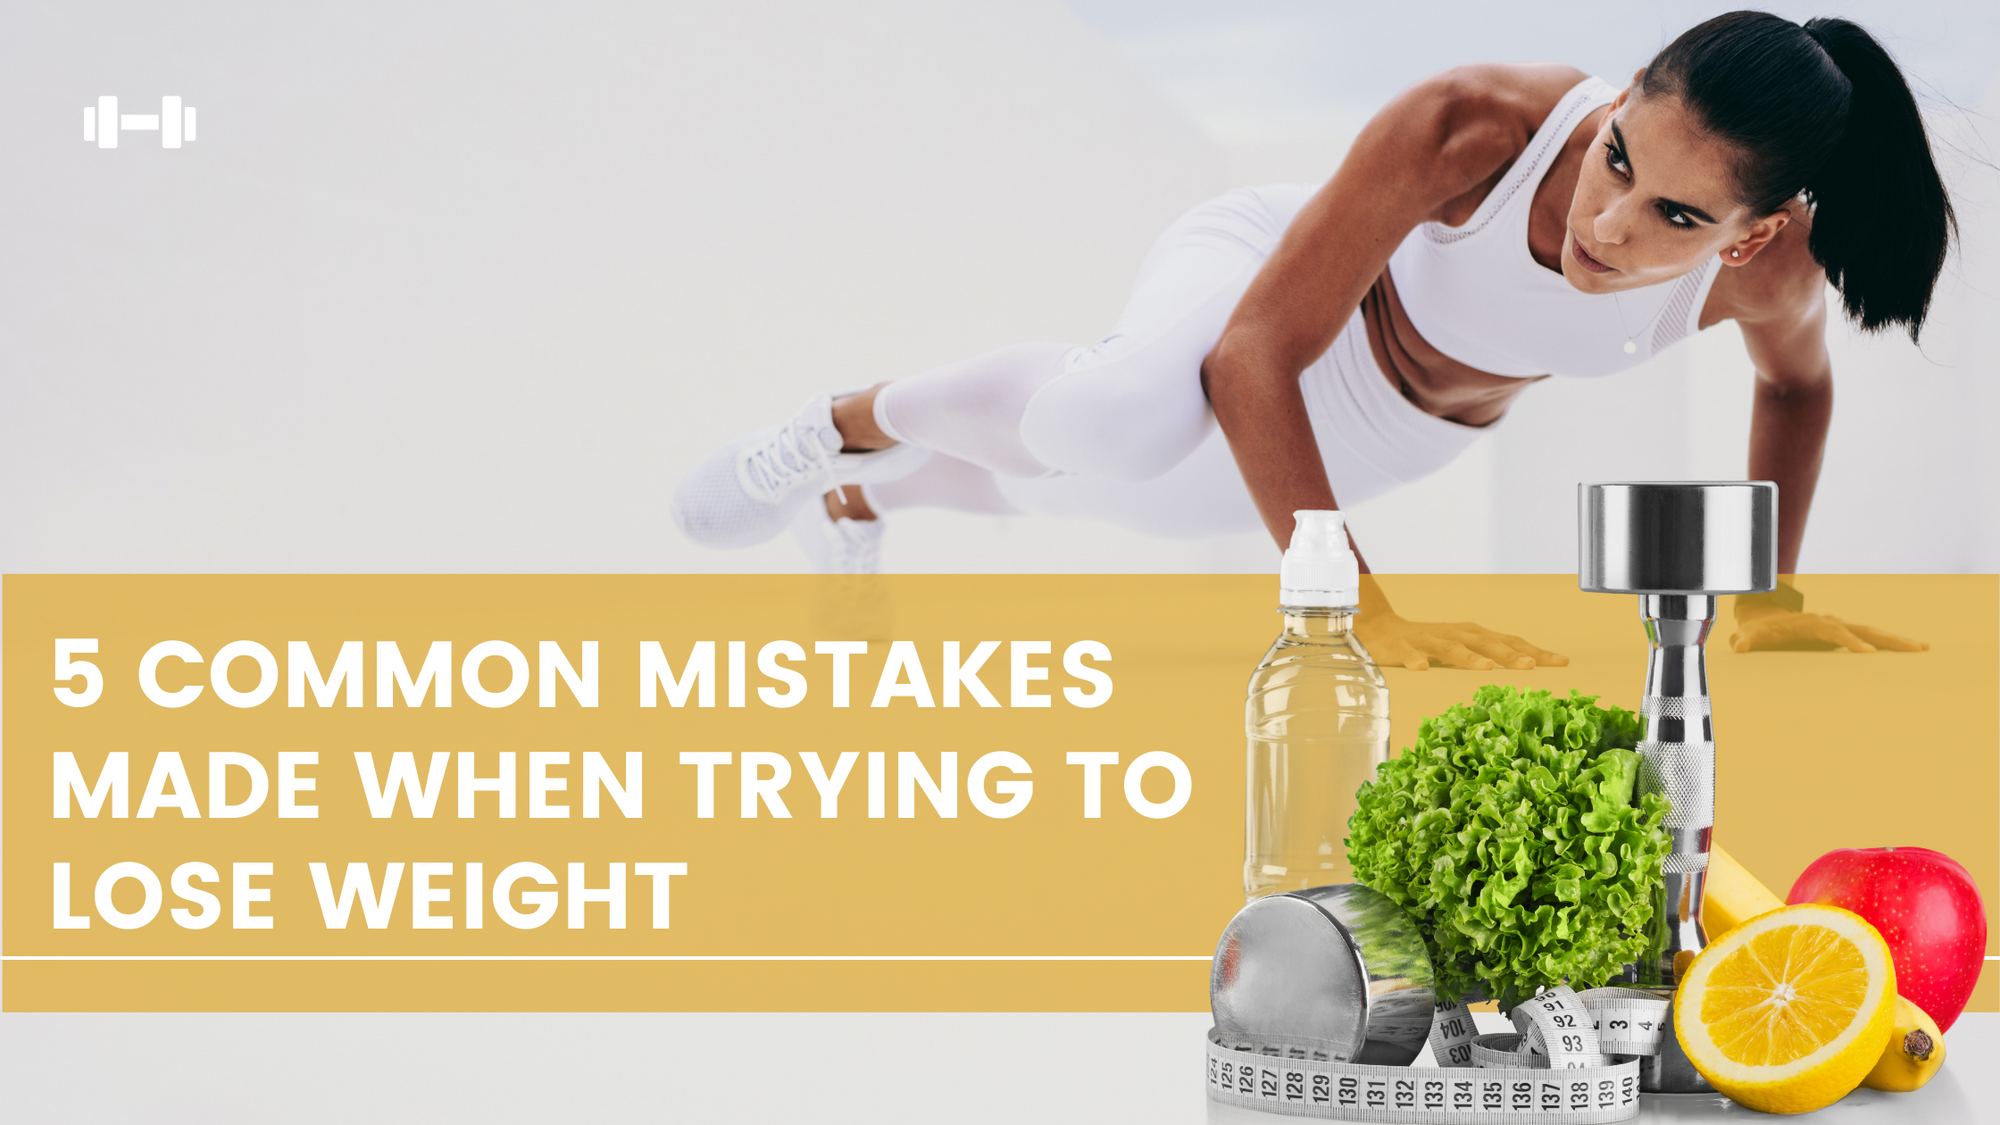 5 common mistakes made when trying to lose weight